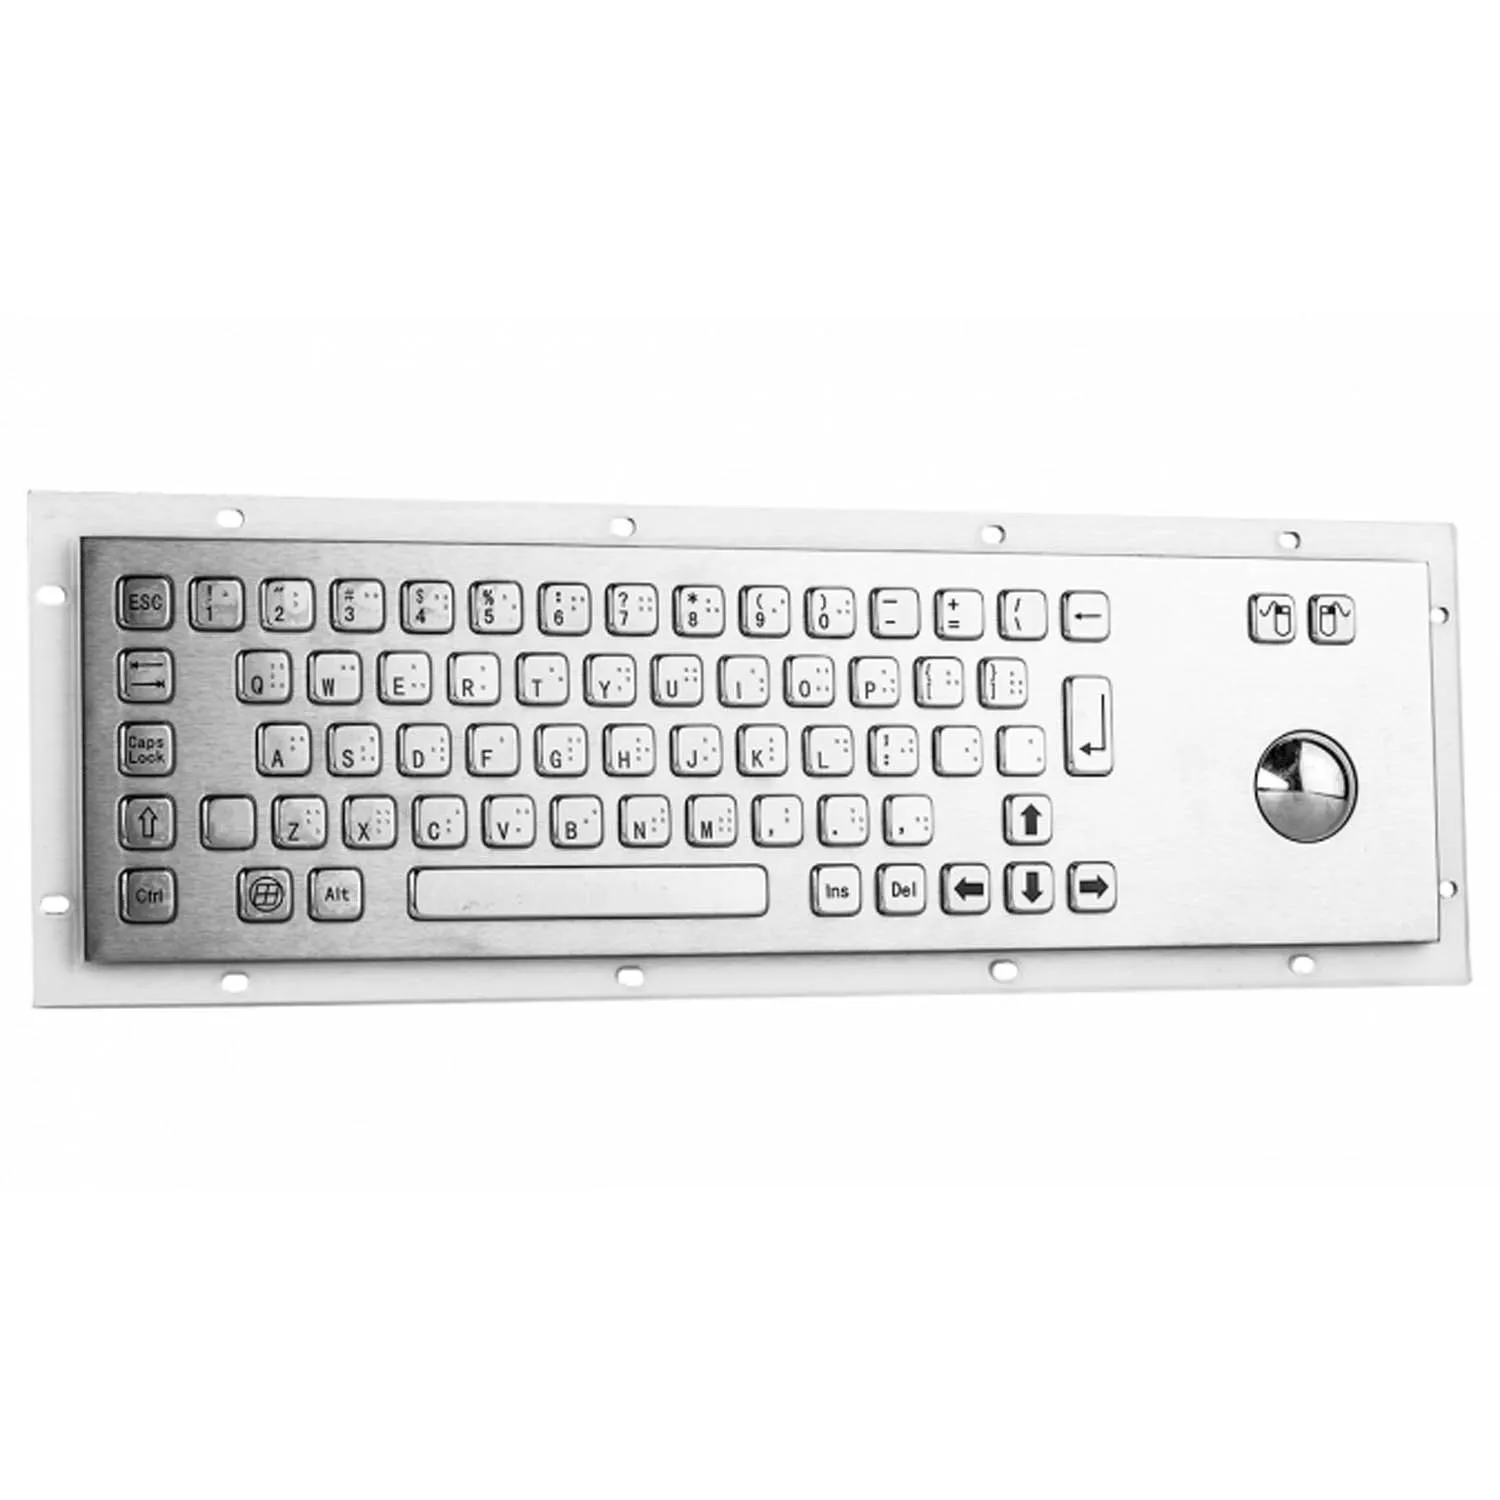 KB-000-NW0S0T3  embedded braille